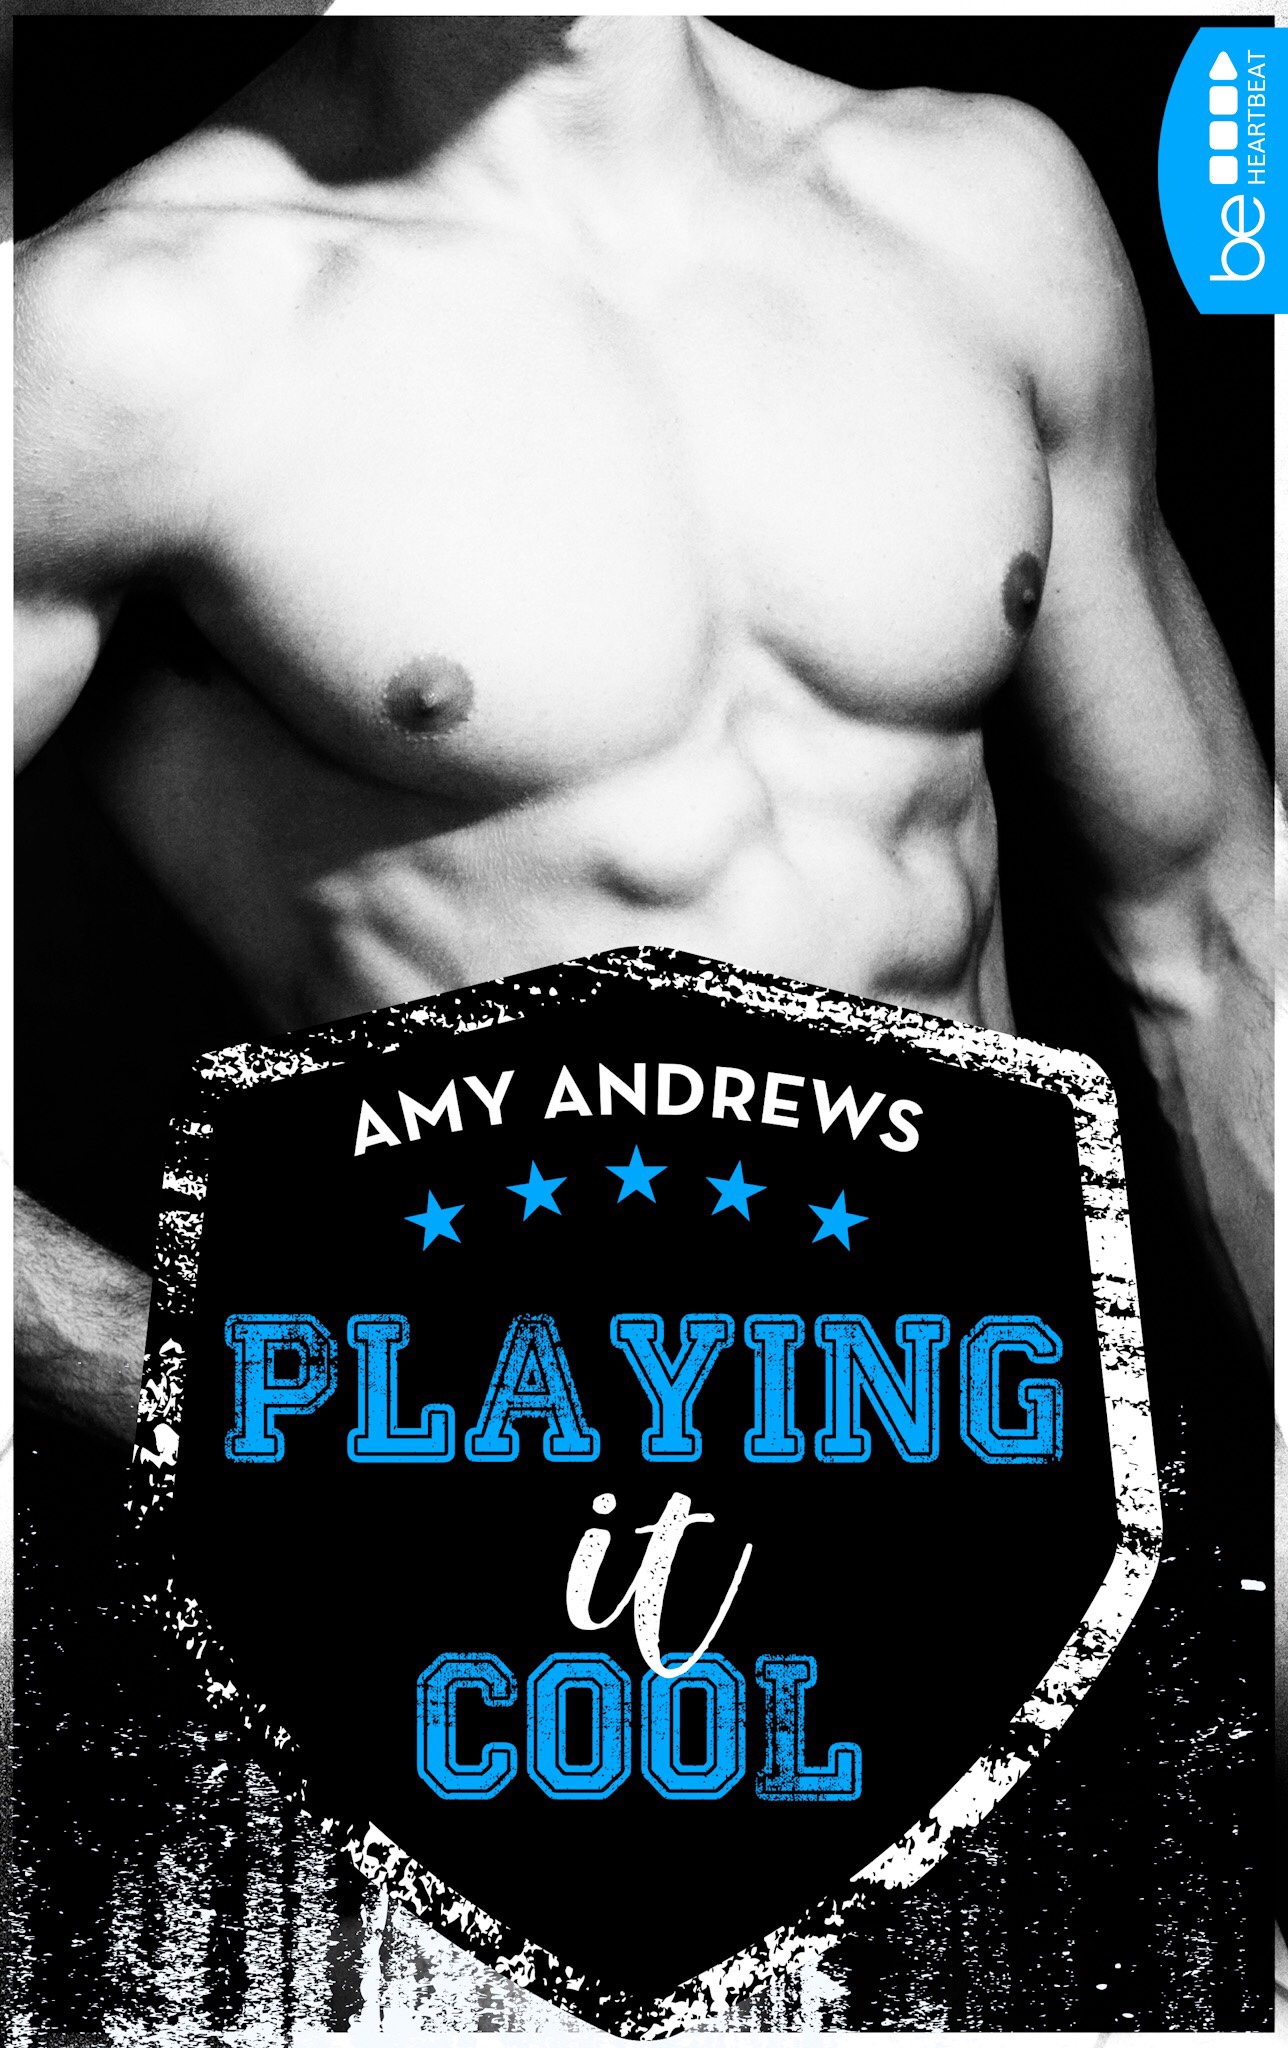 Cover: Playing it cool (Amy Andrews)